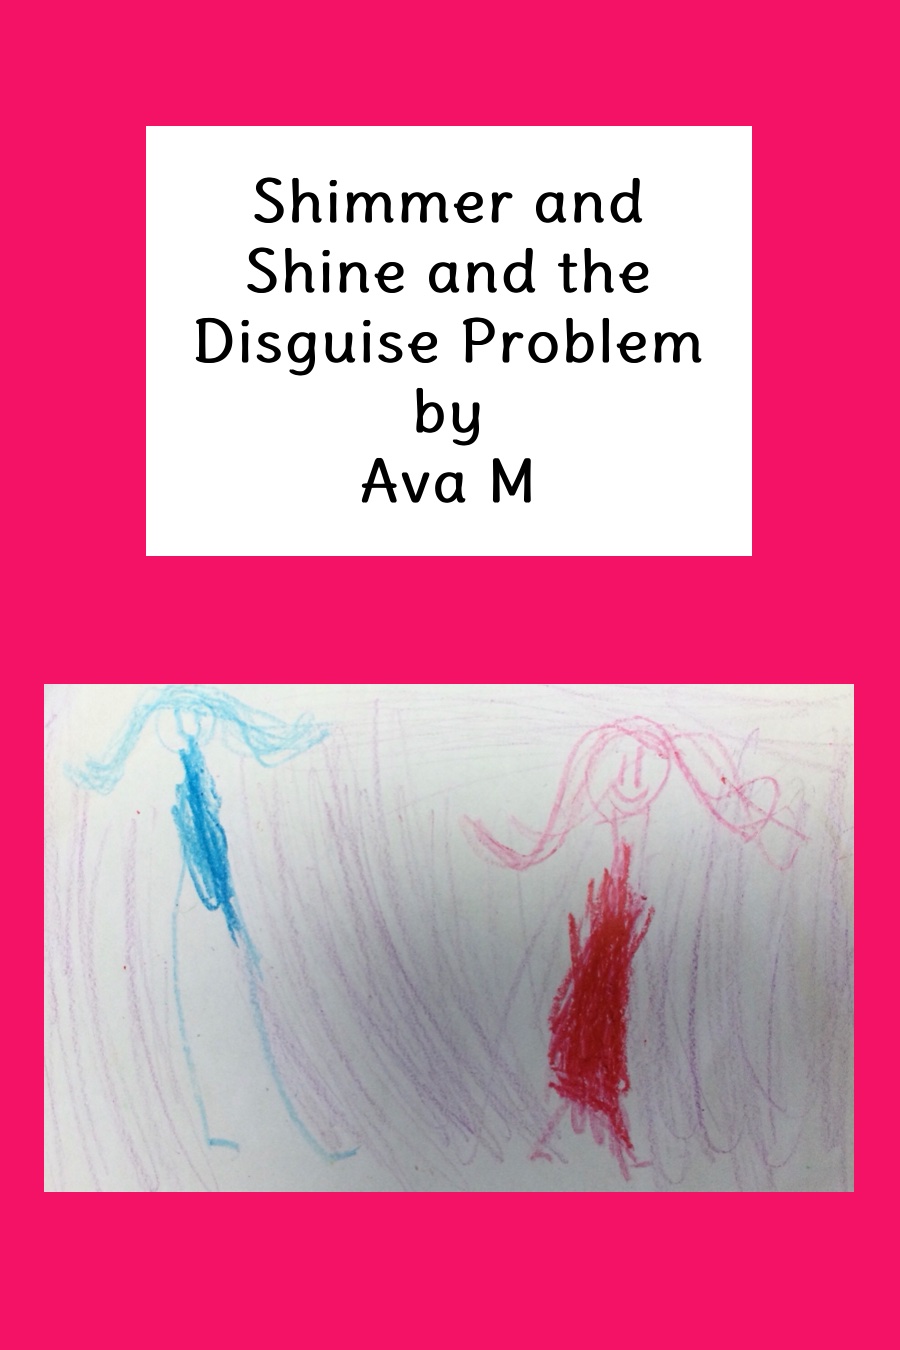 Shimmer and Shine and The Disguise Problem by Ava M